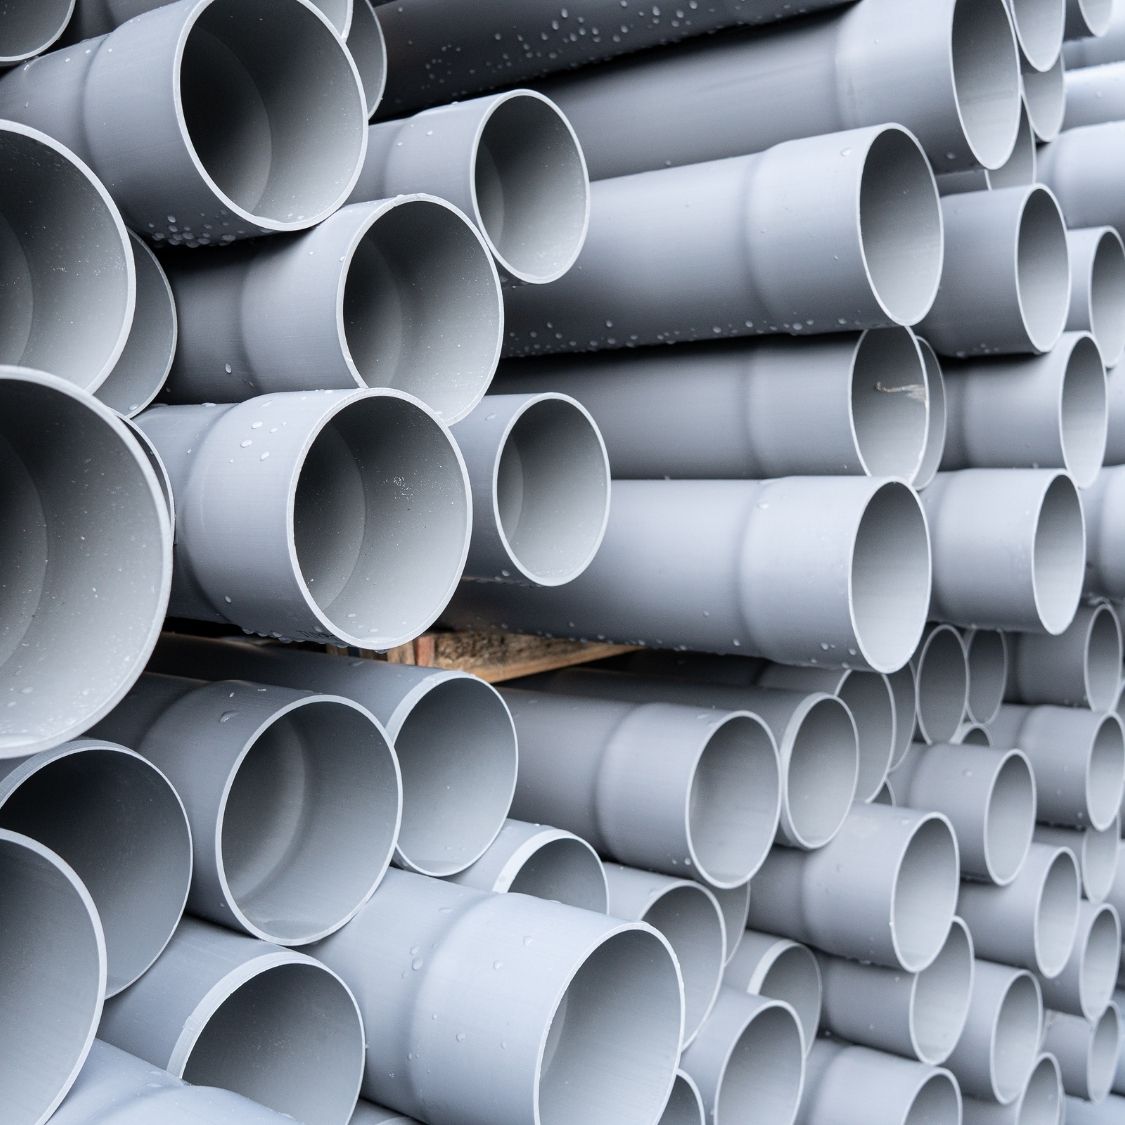 The Many Different Applications of PVC Piping